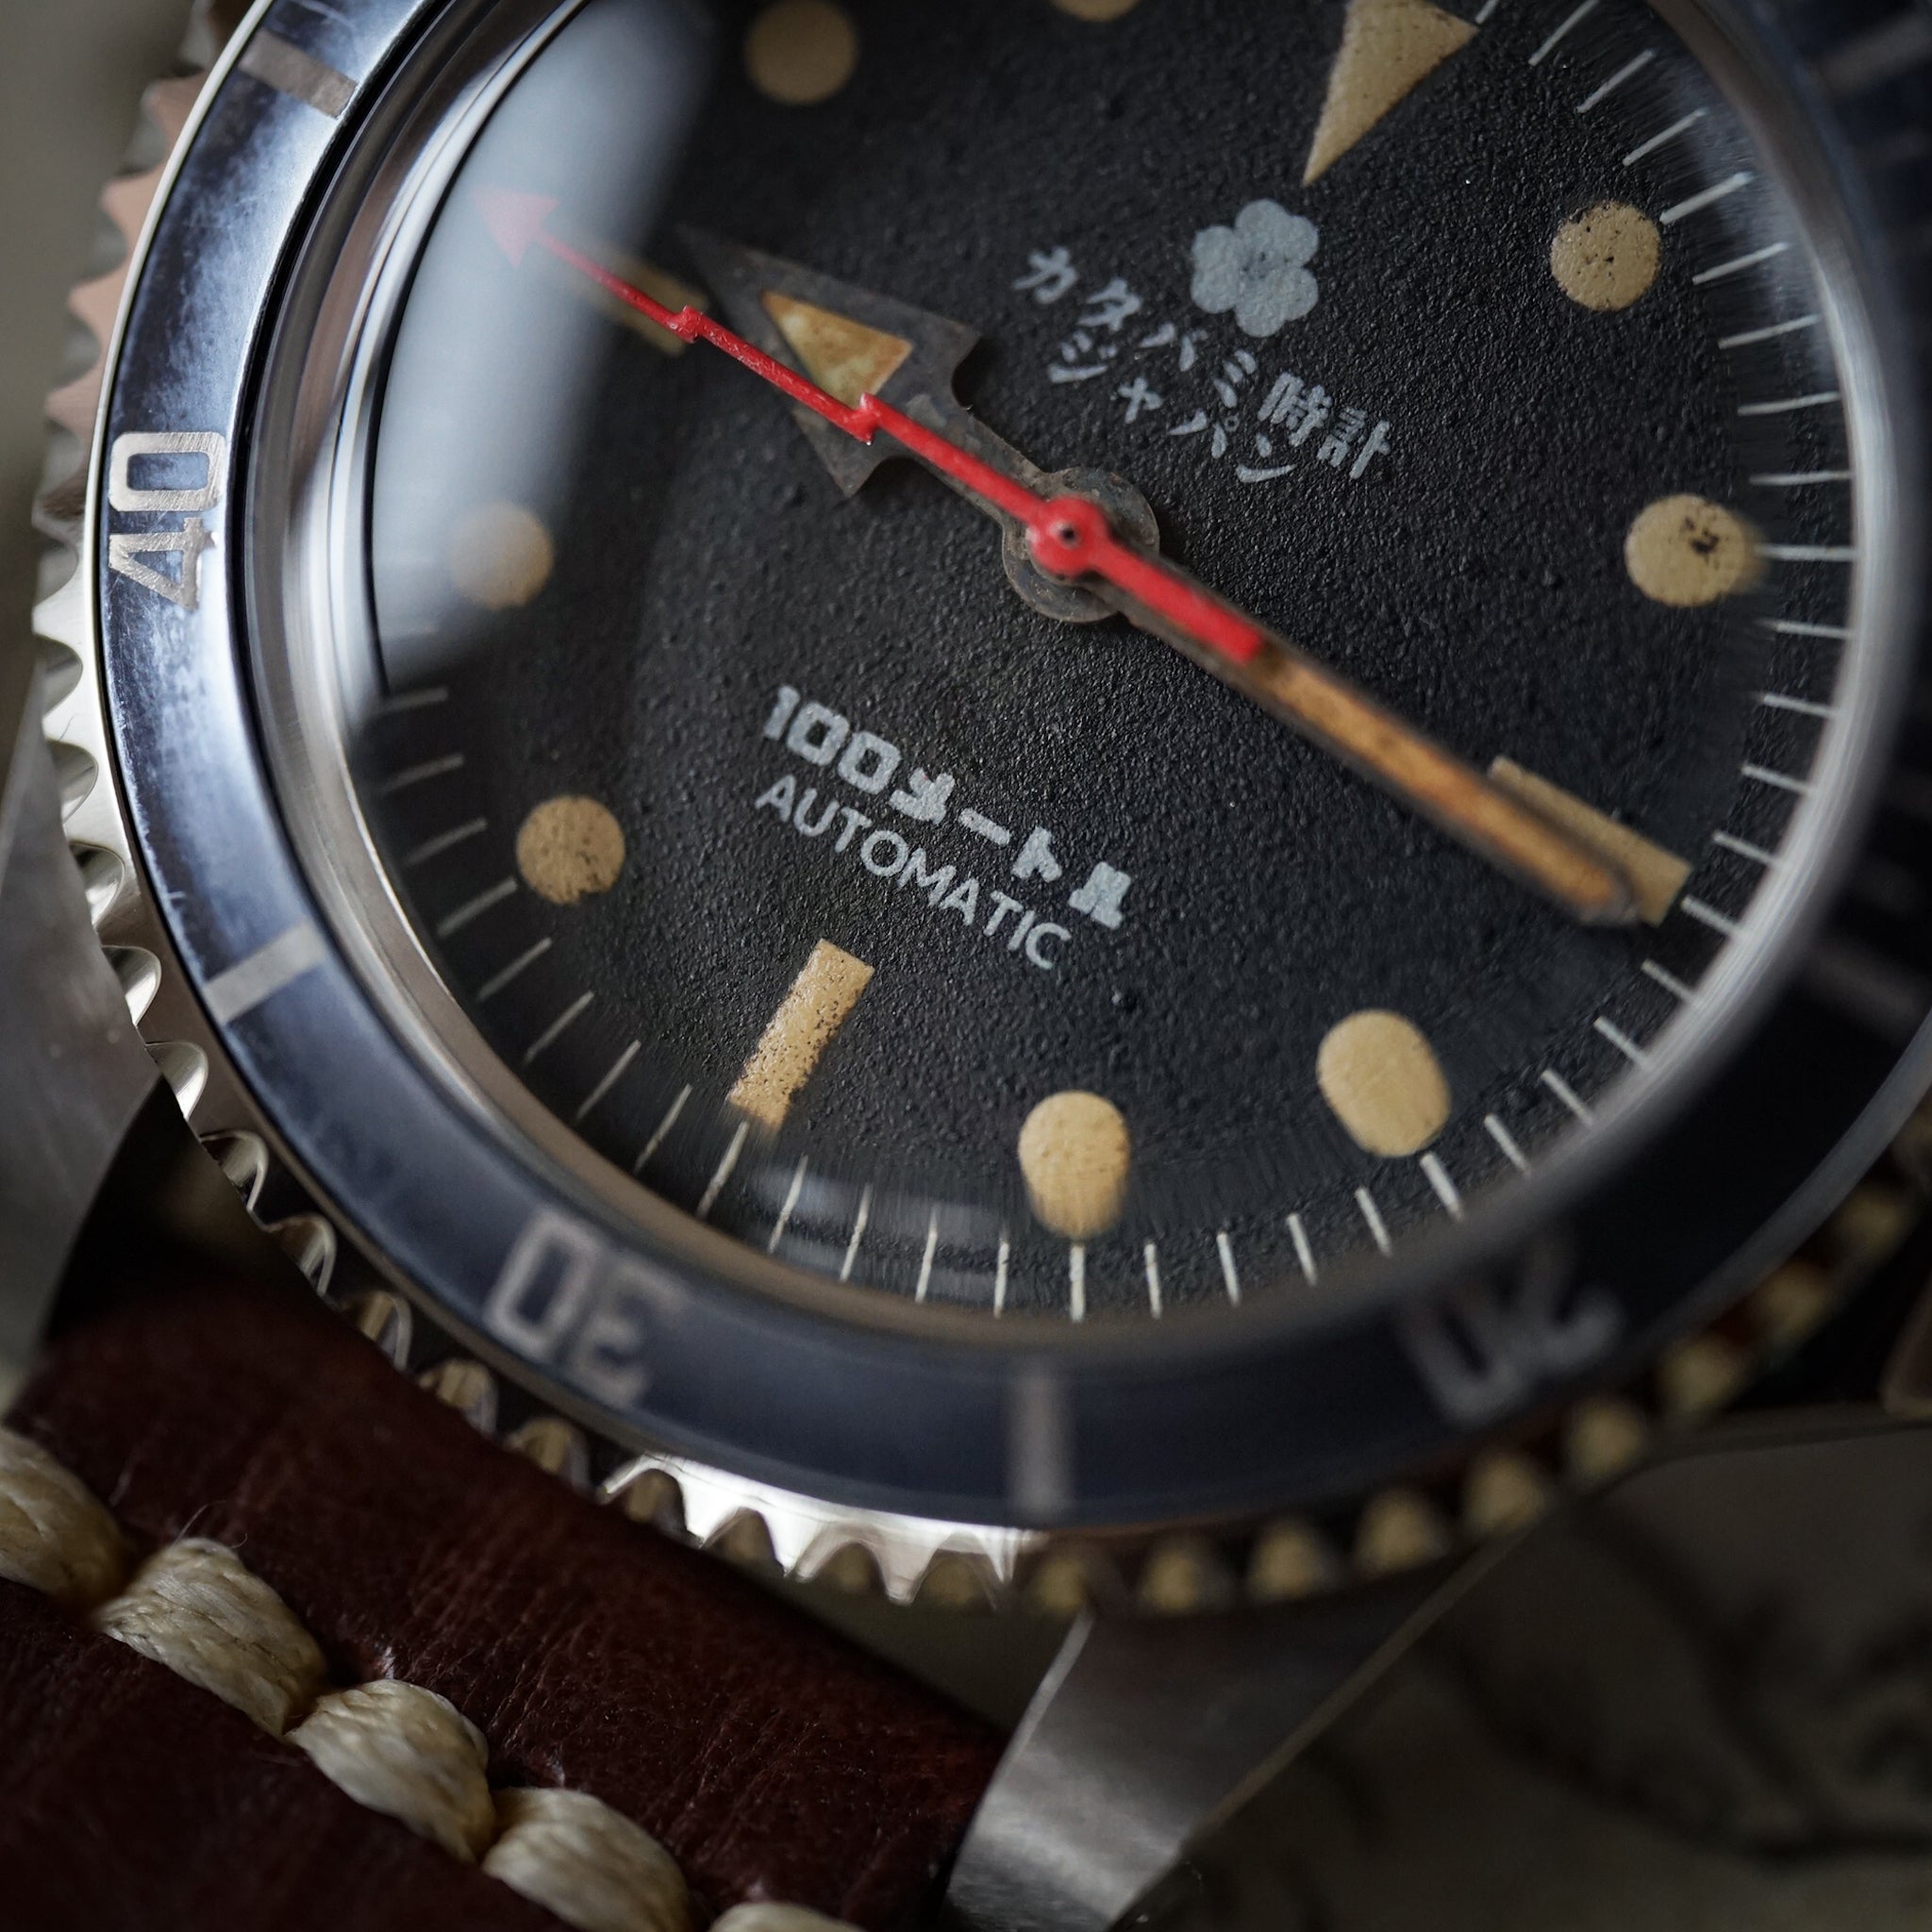 The diver "233"